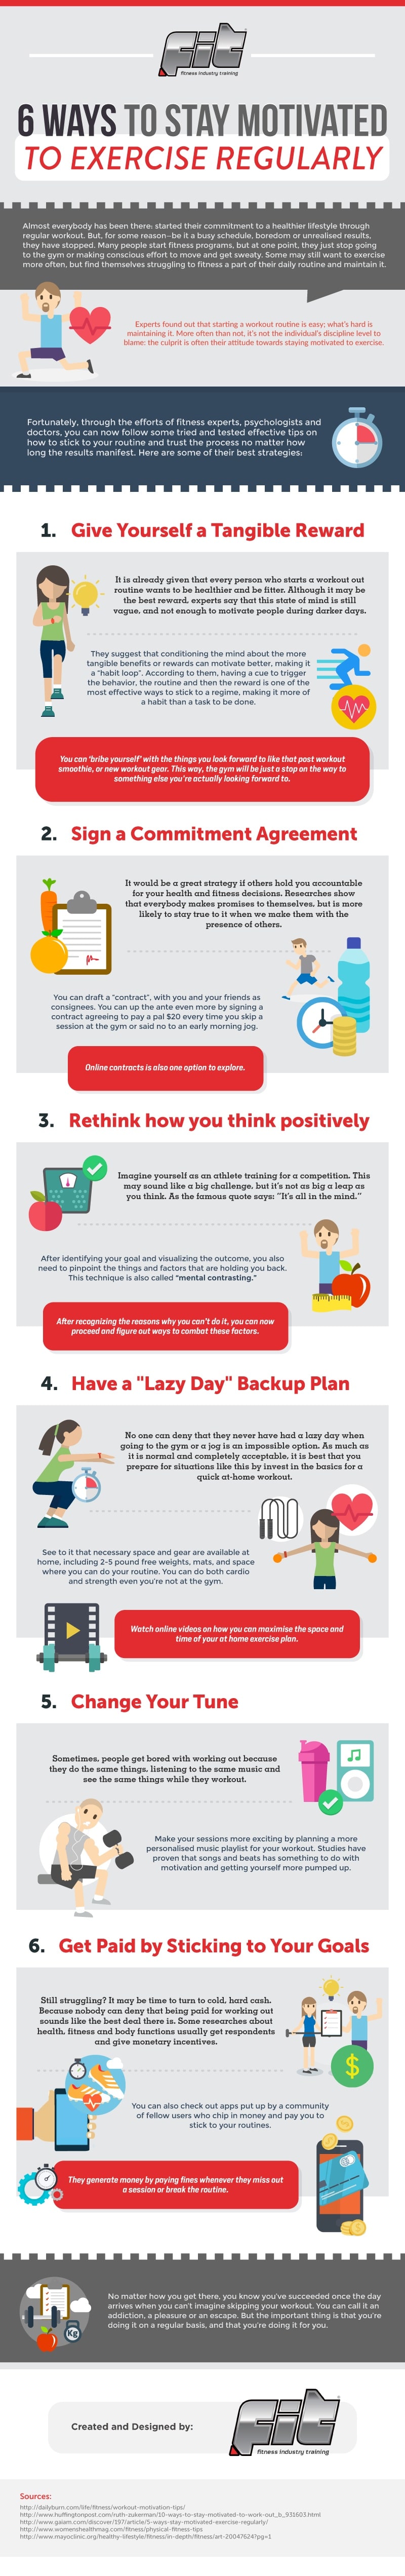 Exercise Motivation: 6 ways to stay motivated in this infographic by F.I.T Australia